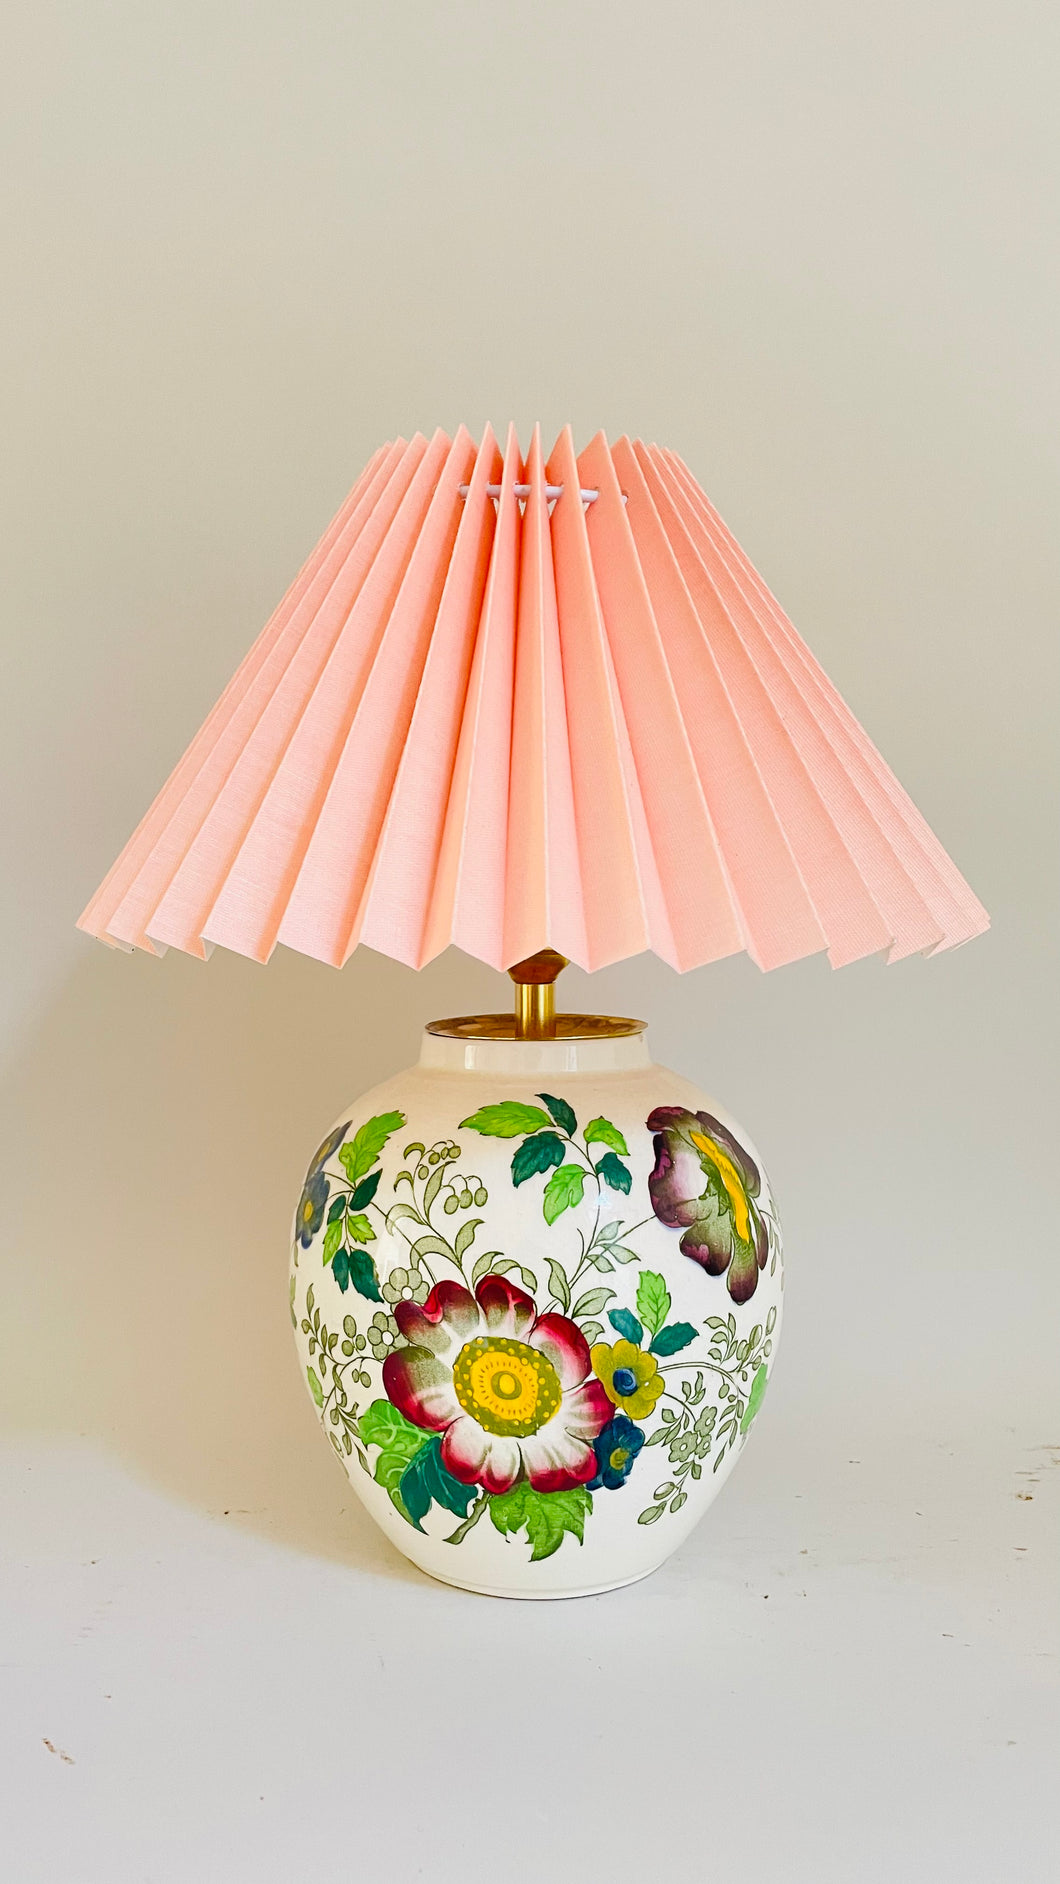 Antique Mason's Lamp - pre order for early May